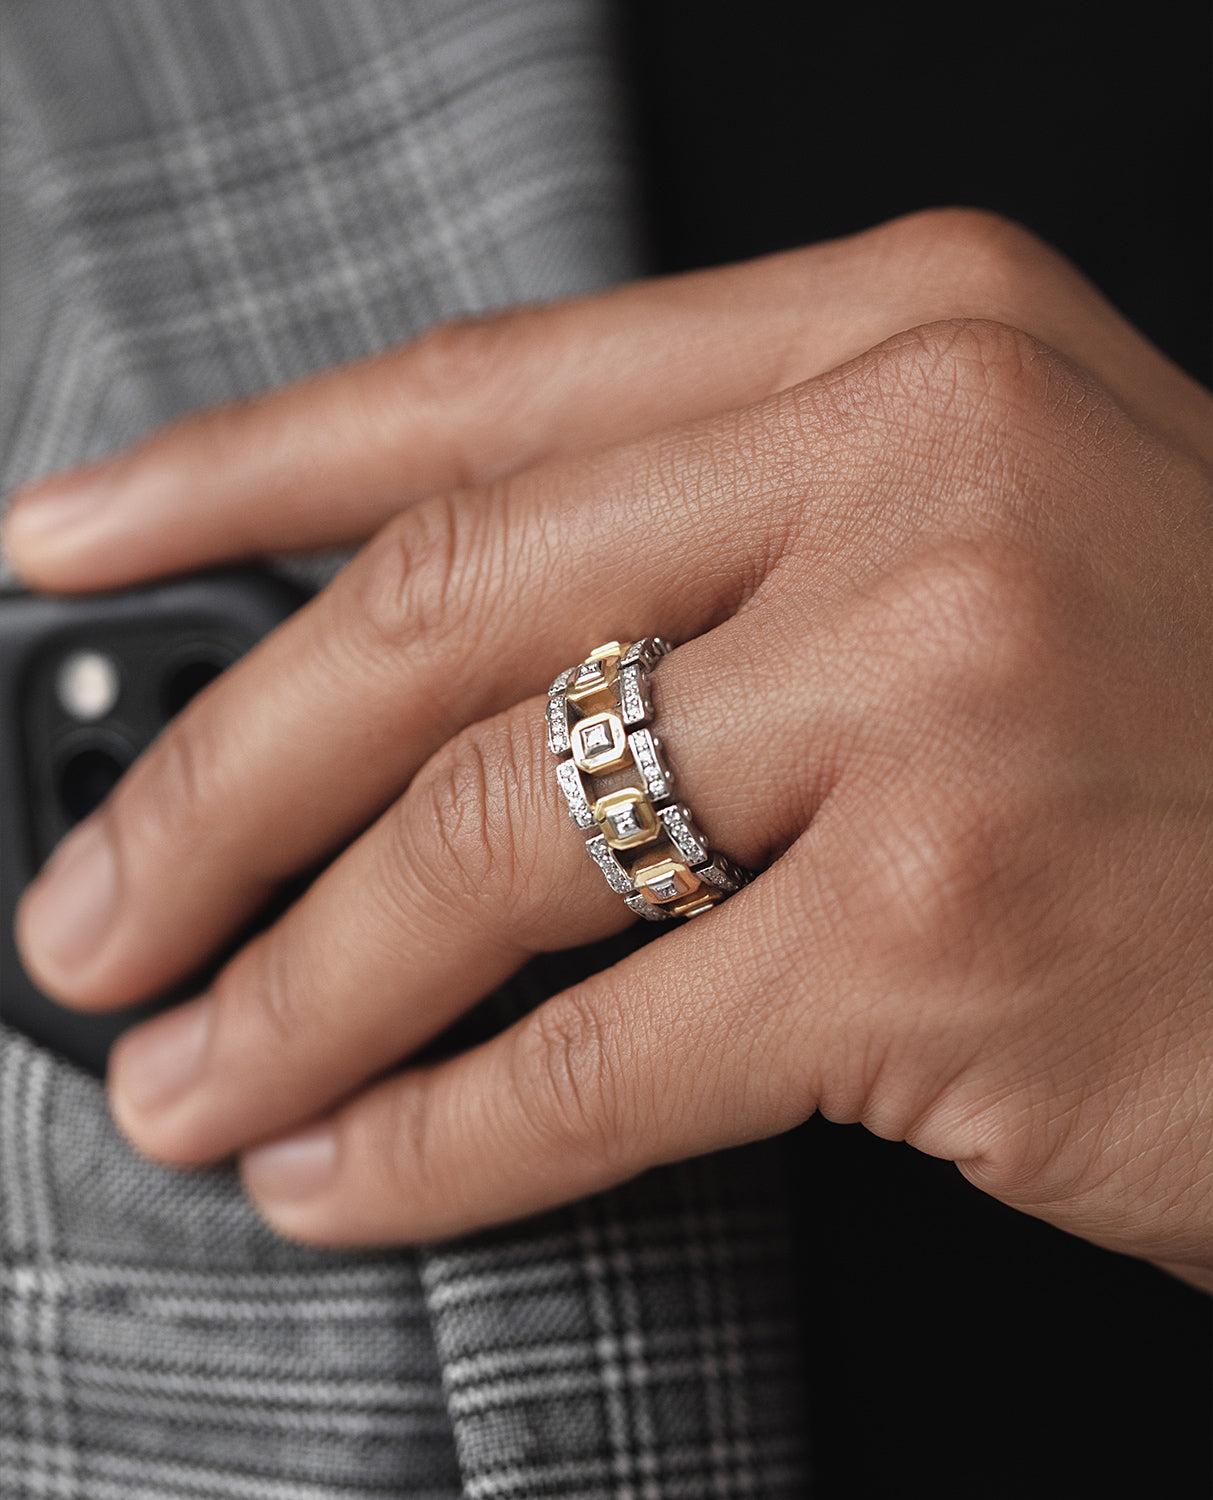 The design of this two-tone band bridges two different styles in its variations of 1.20ct white diamond pave setting and metals: contemporary classic and cutting-edge modern. The La Paz, often enjoyed as an exceptional statement piece, can even be